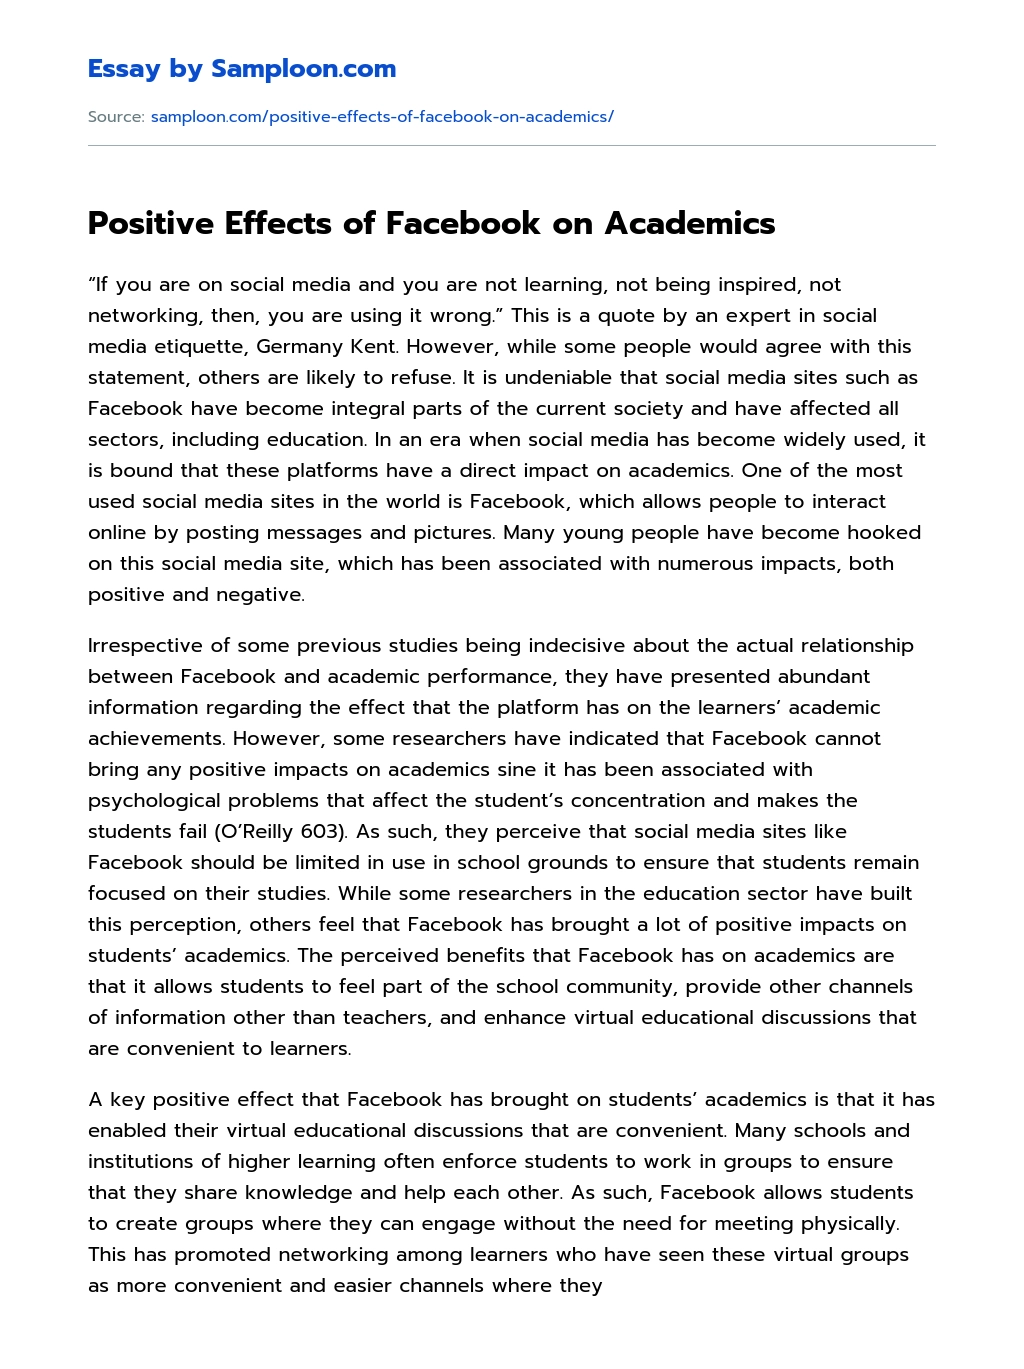 Positive Effects of Facebook on Academics  essay